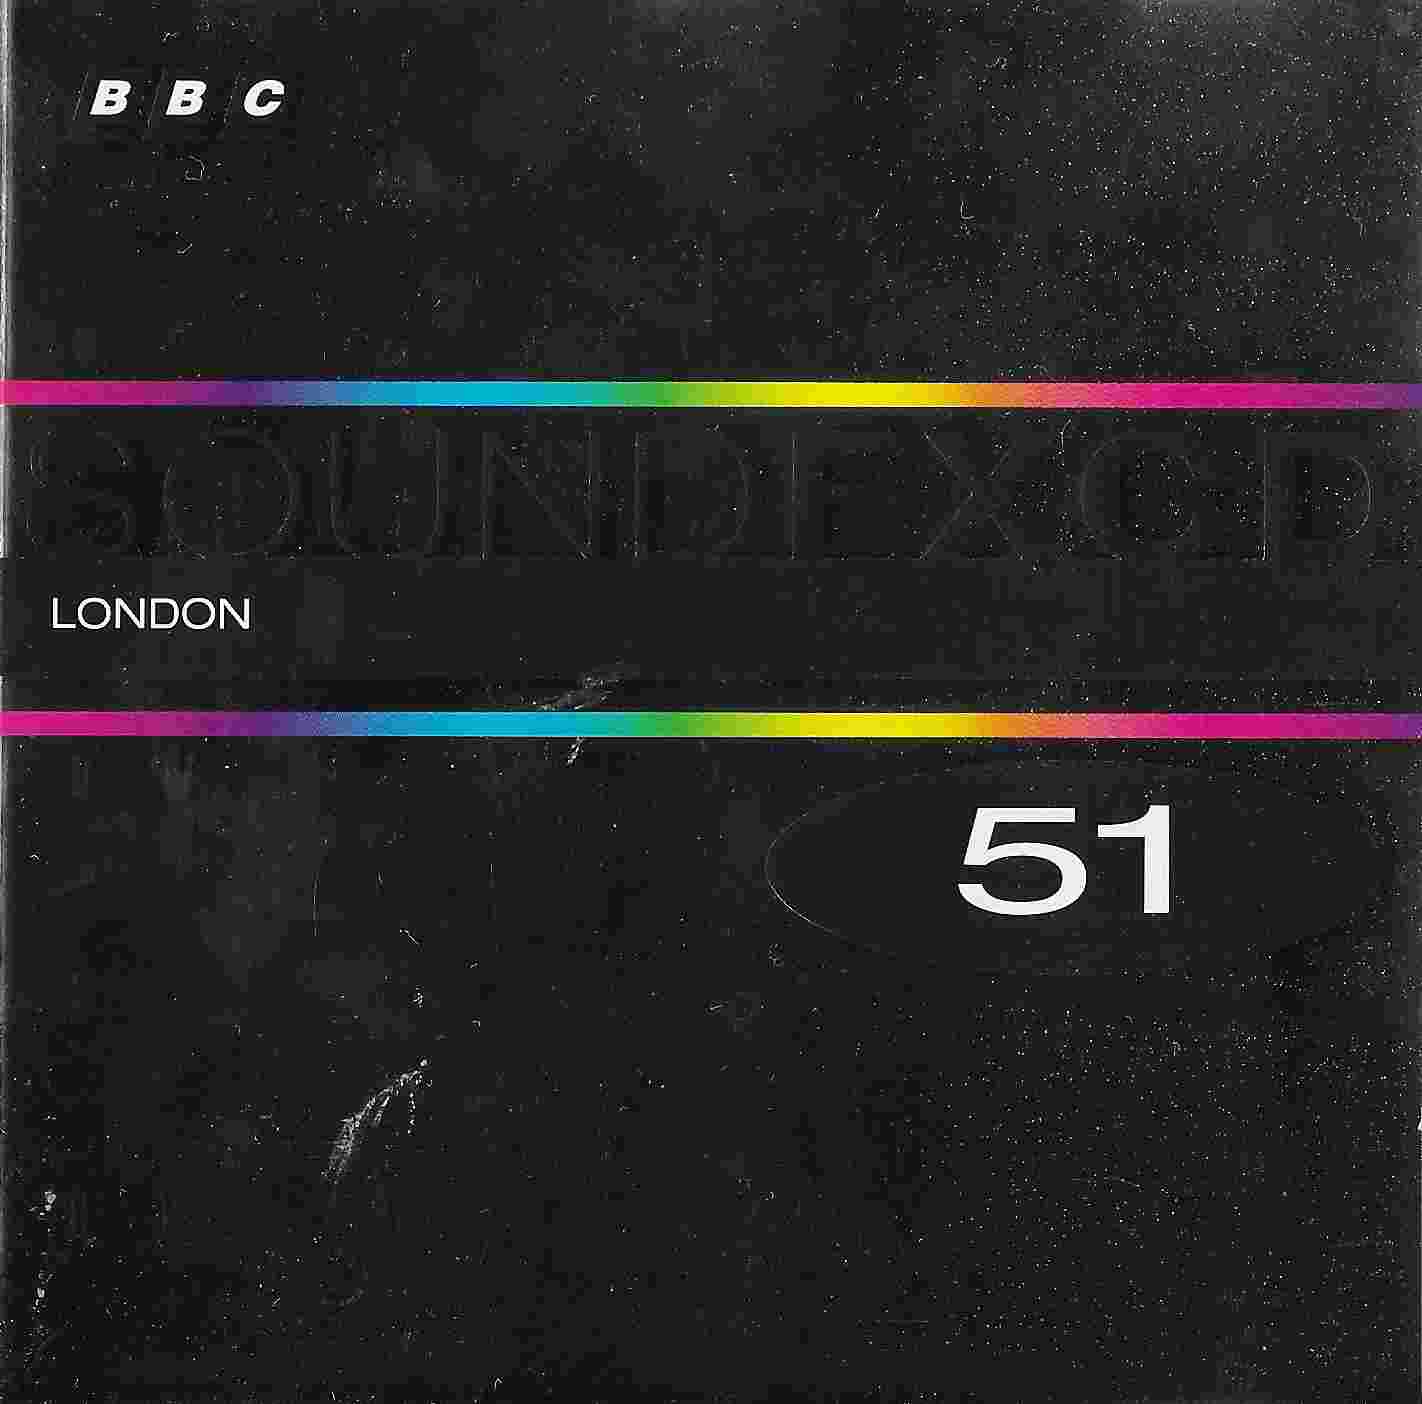 Picture of BBCCD SFX051 London by artist Various from the BBC cds - Records and Tapes library